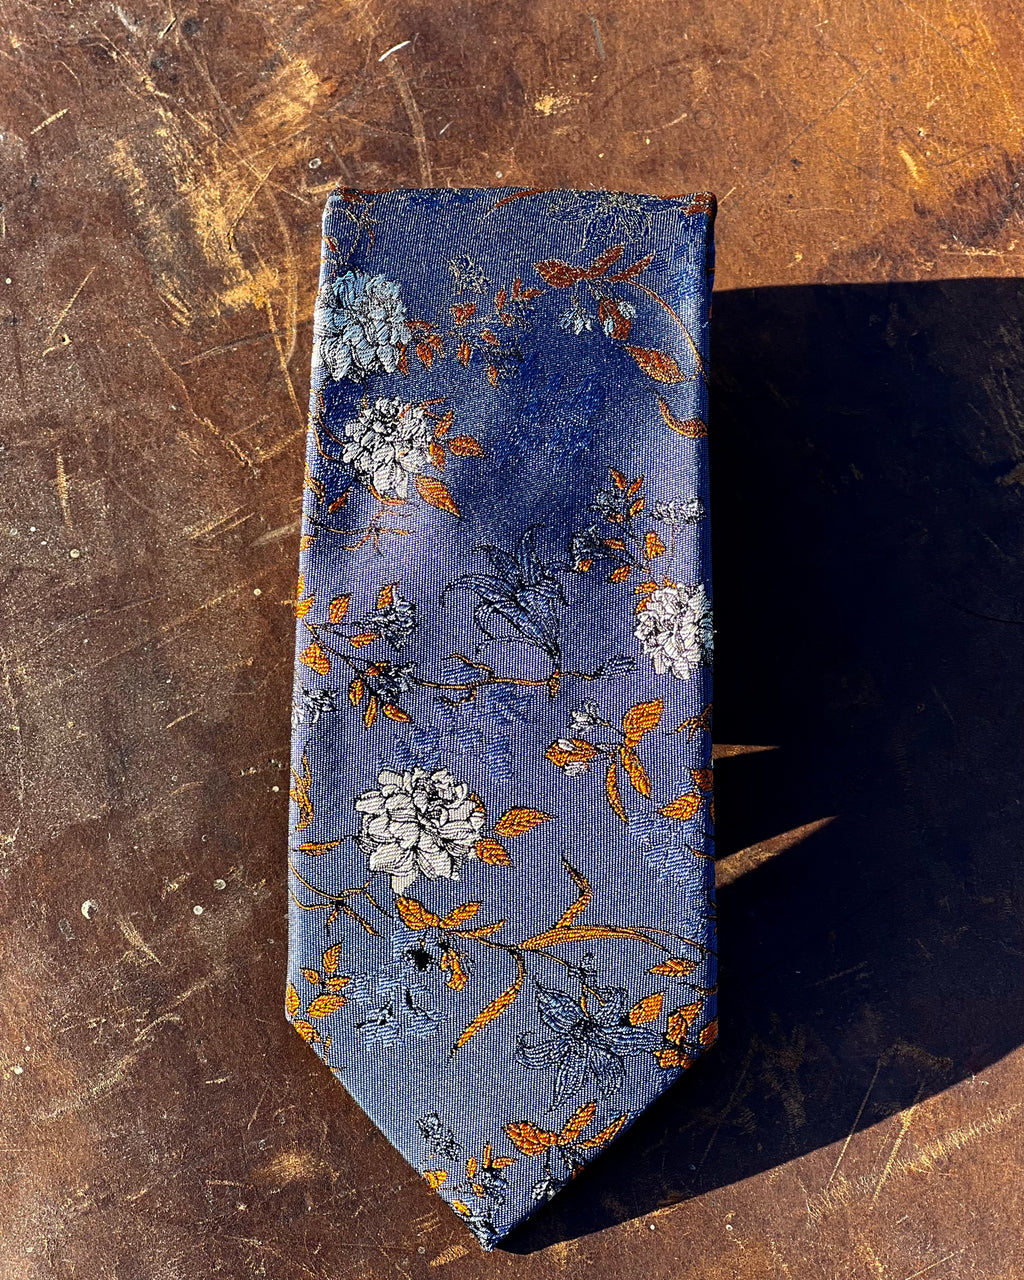 Floral silk tie - white roses, gold leaves, blue background